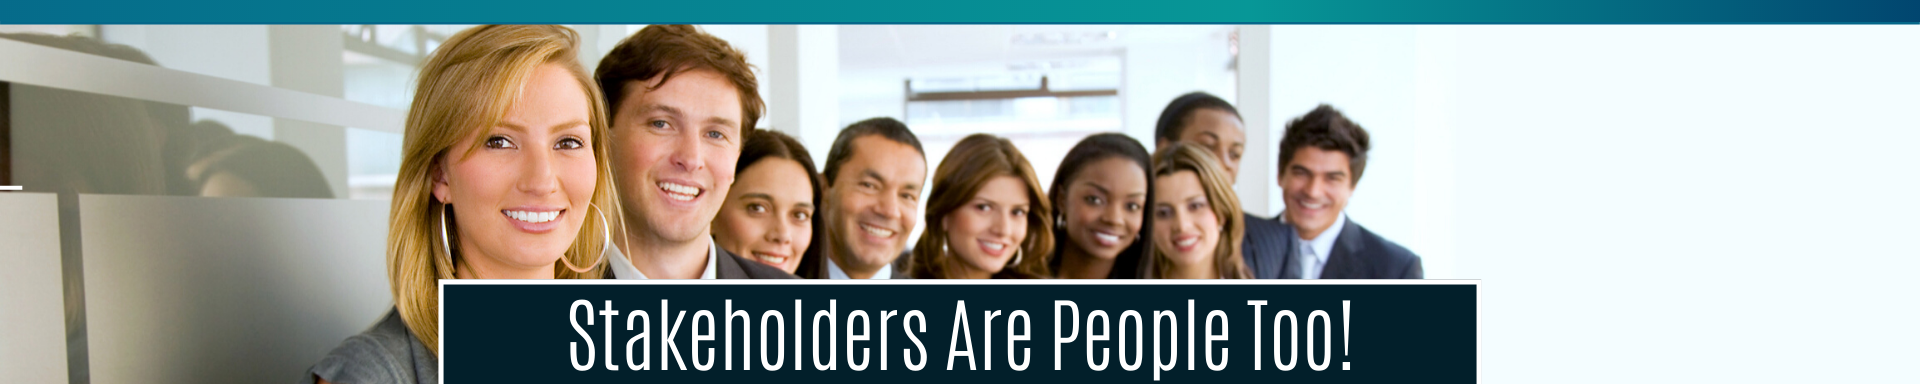 Stakeholders Are People Too!